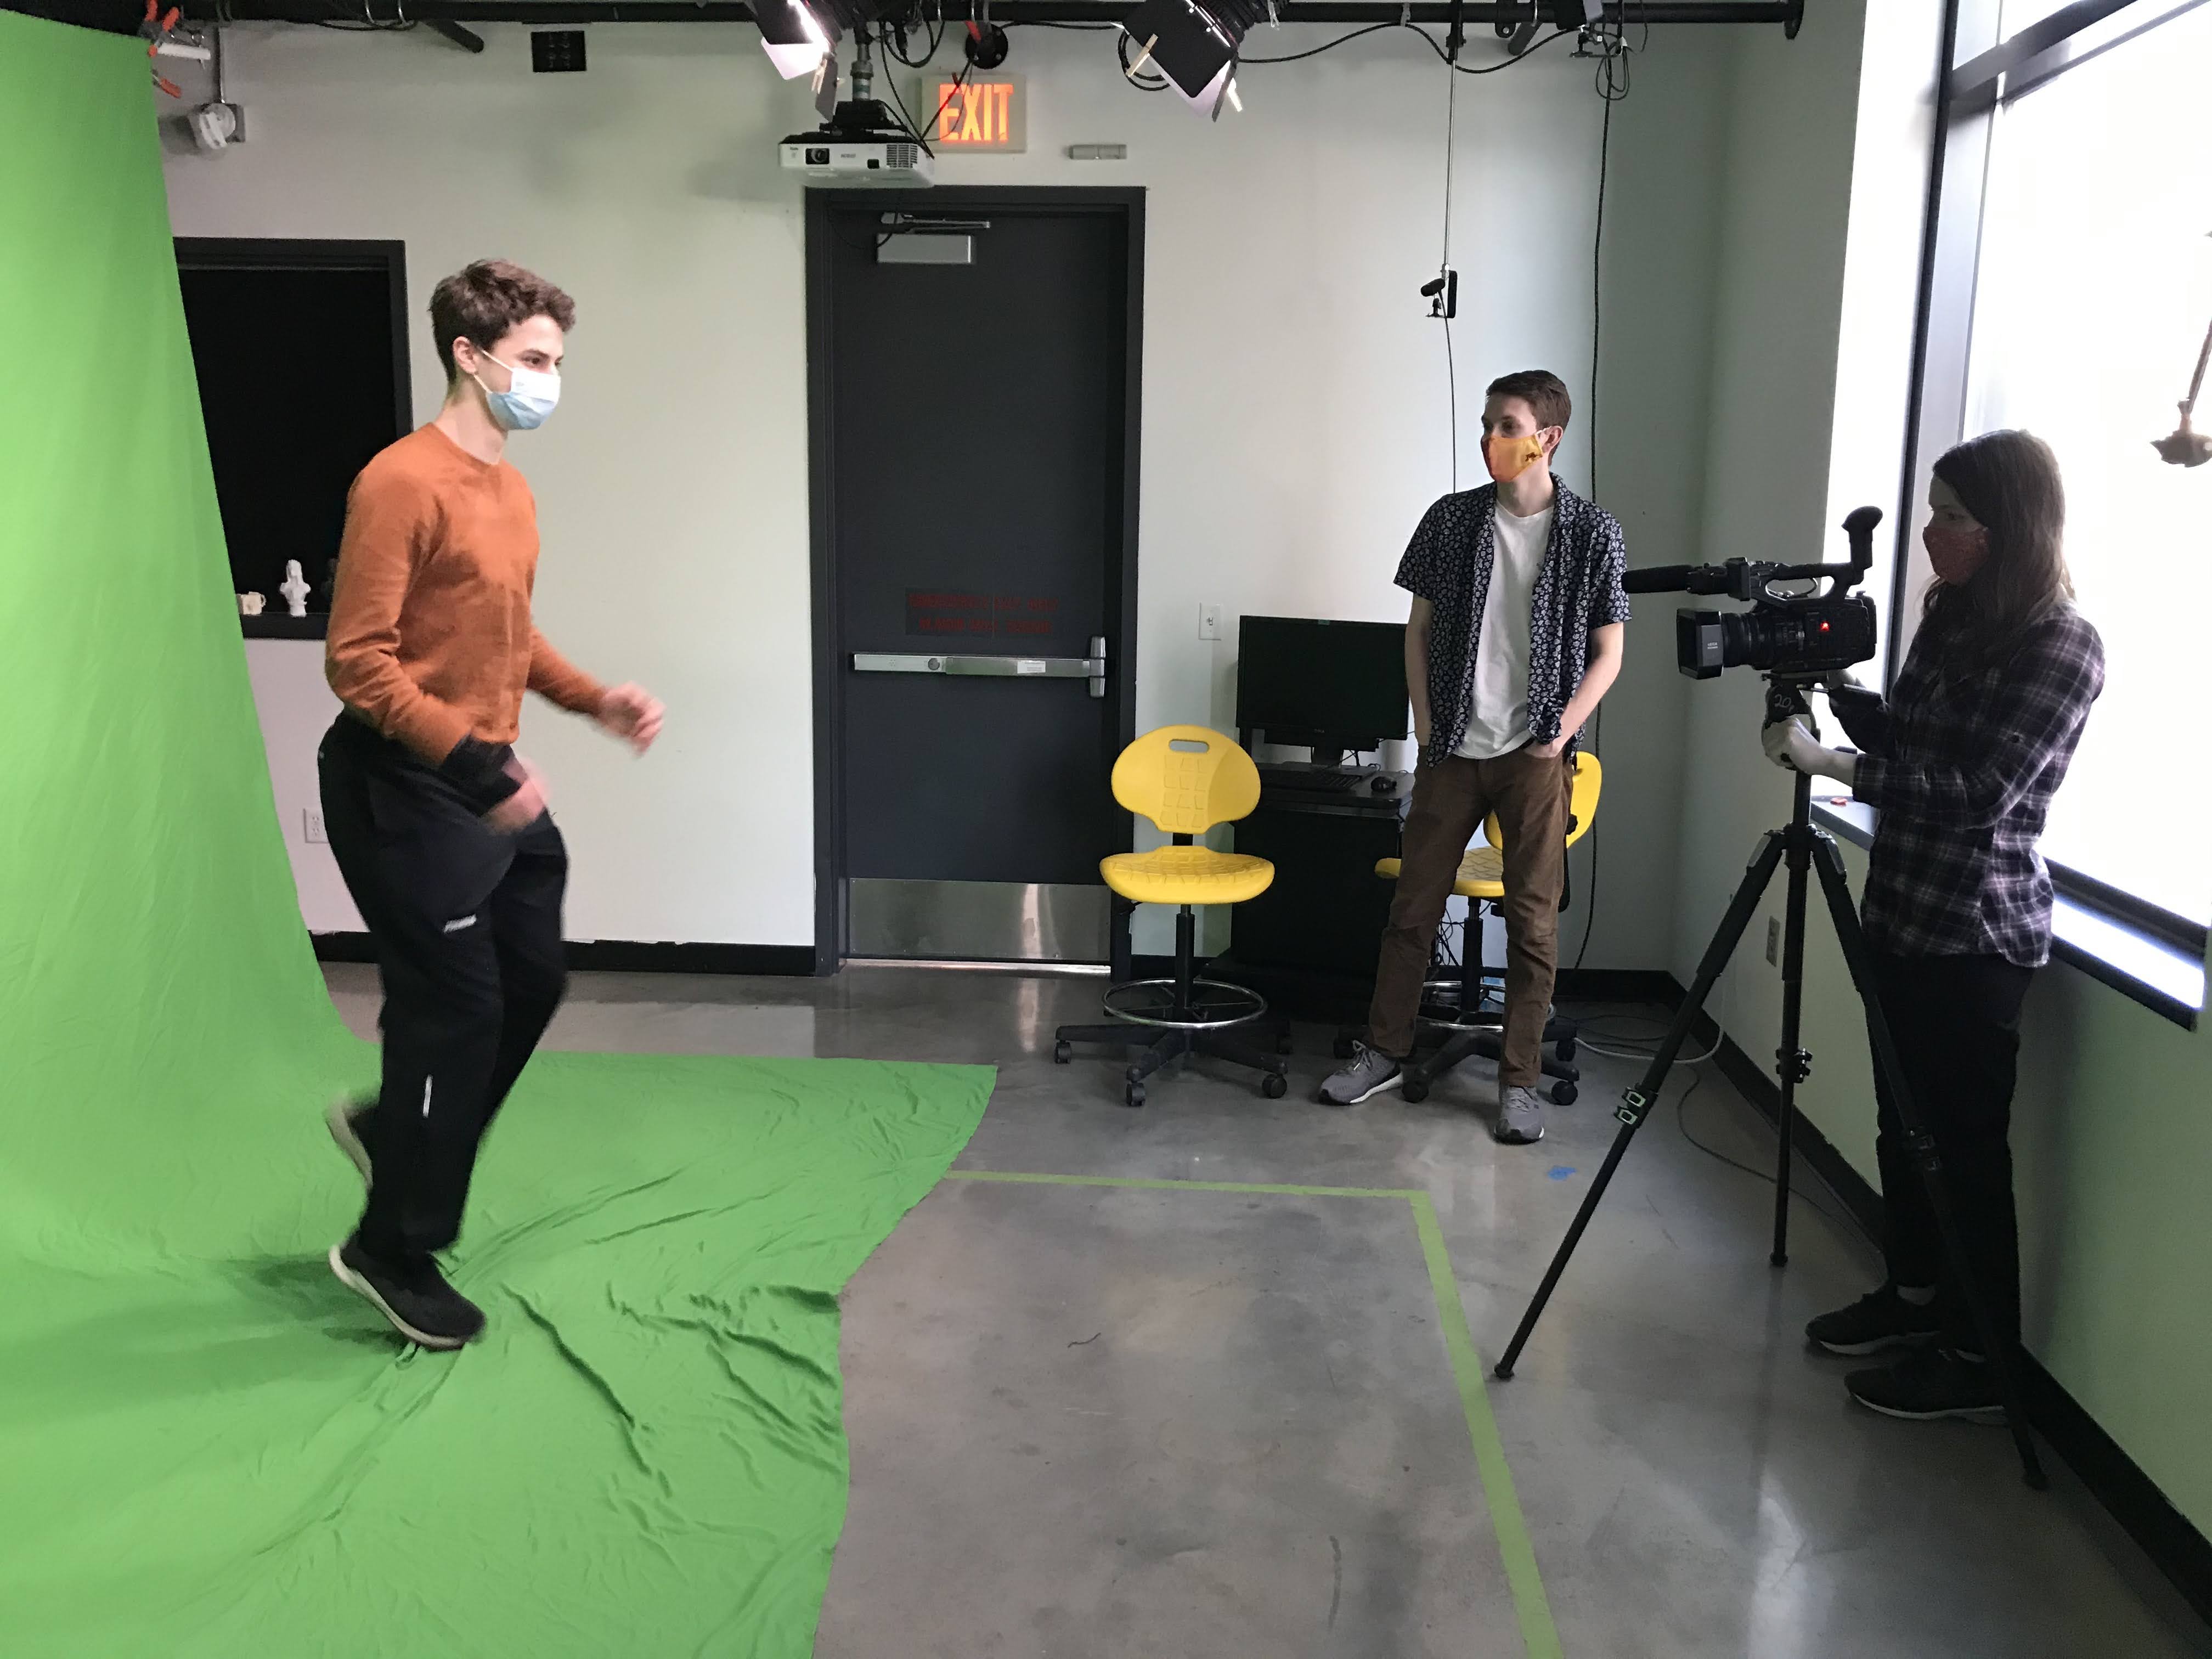 students filming another student pretending to run against a green screen